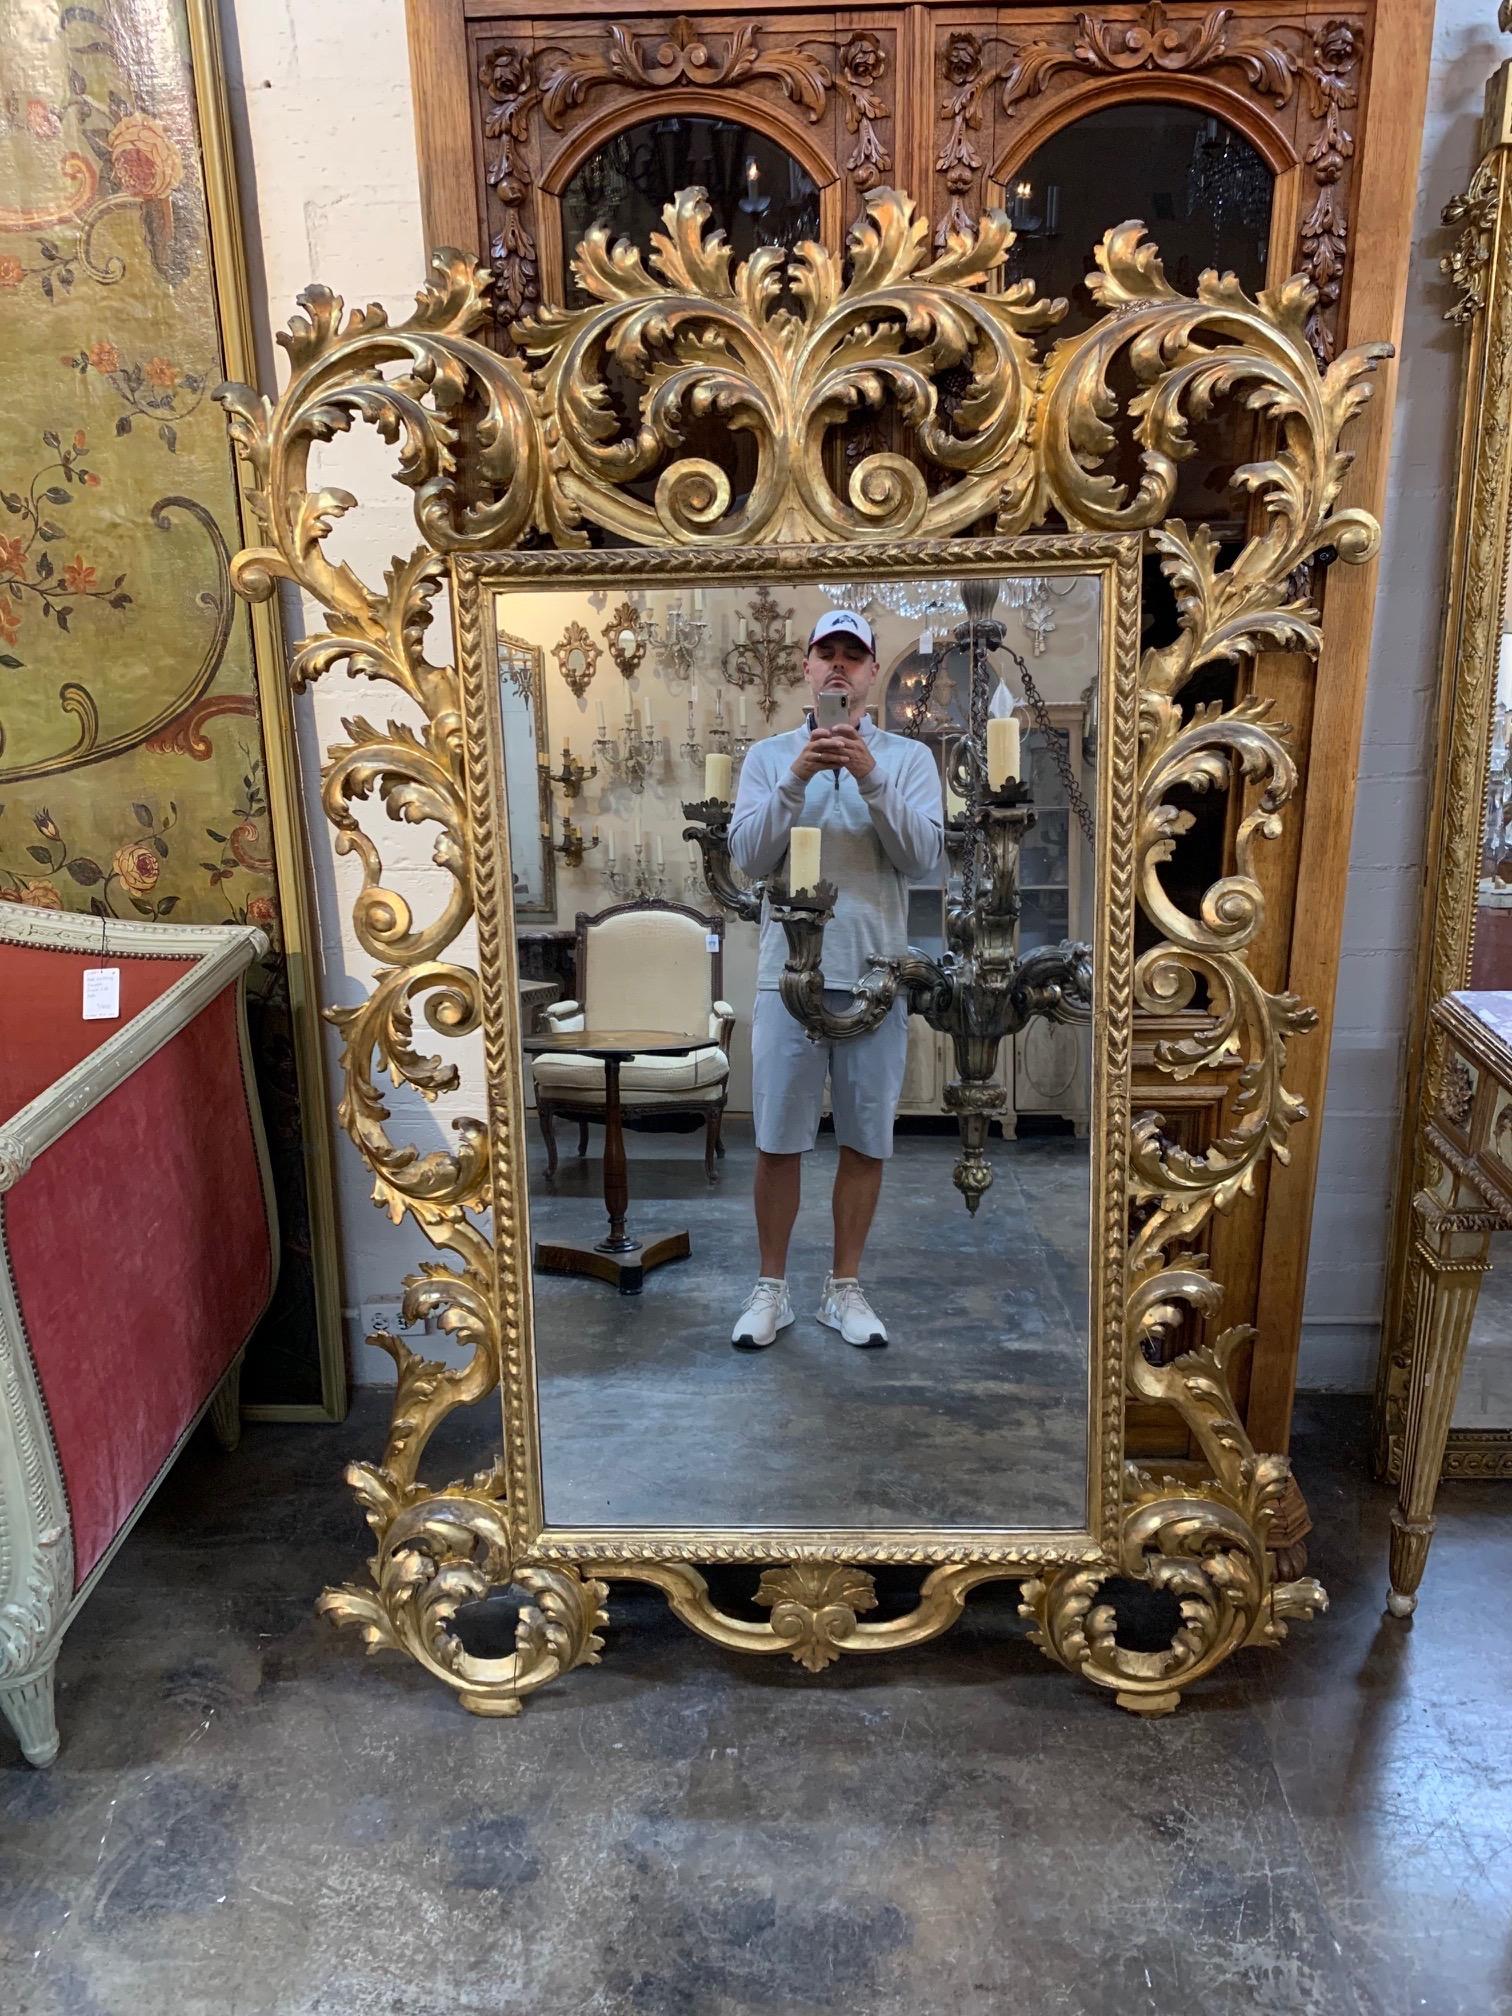 Large scale fabulous 19th century Italian Florentine carved and giltwood mirror. Very fine carvings and gilt on this piece. Makes an impressive focal point. Exquisite!